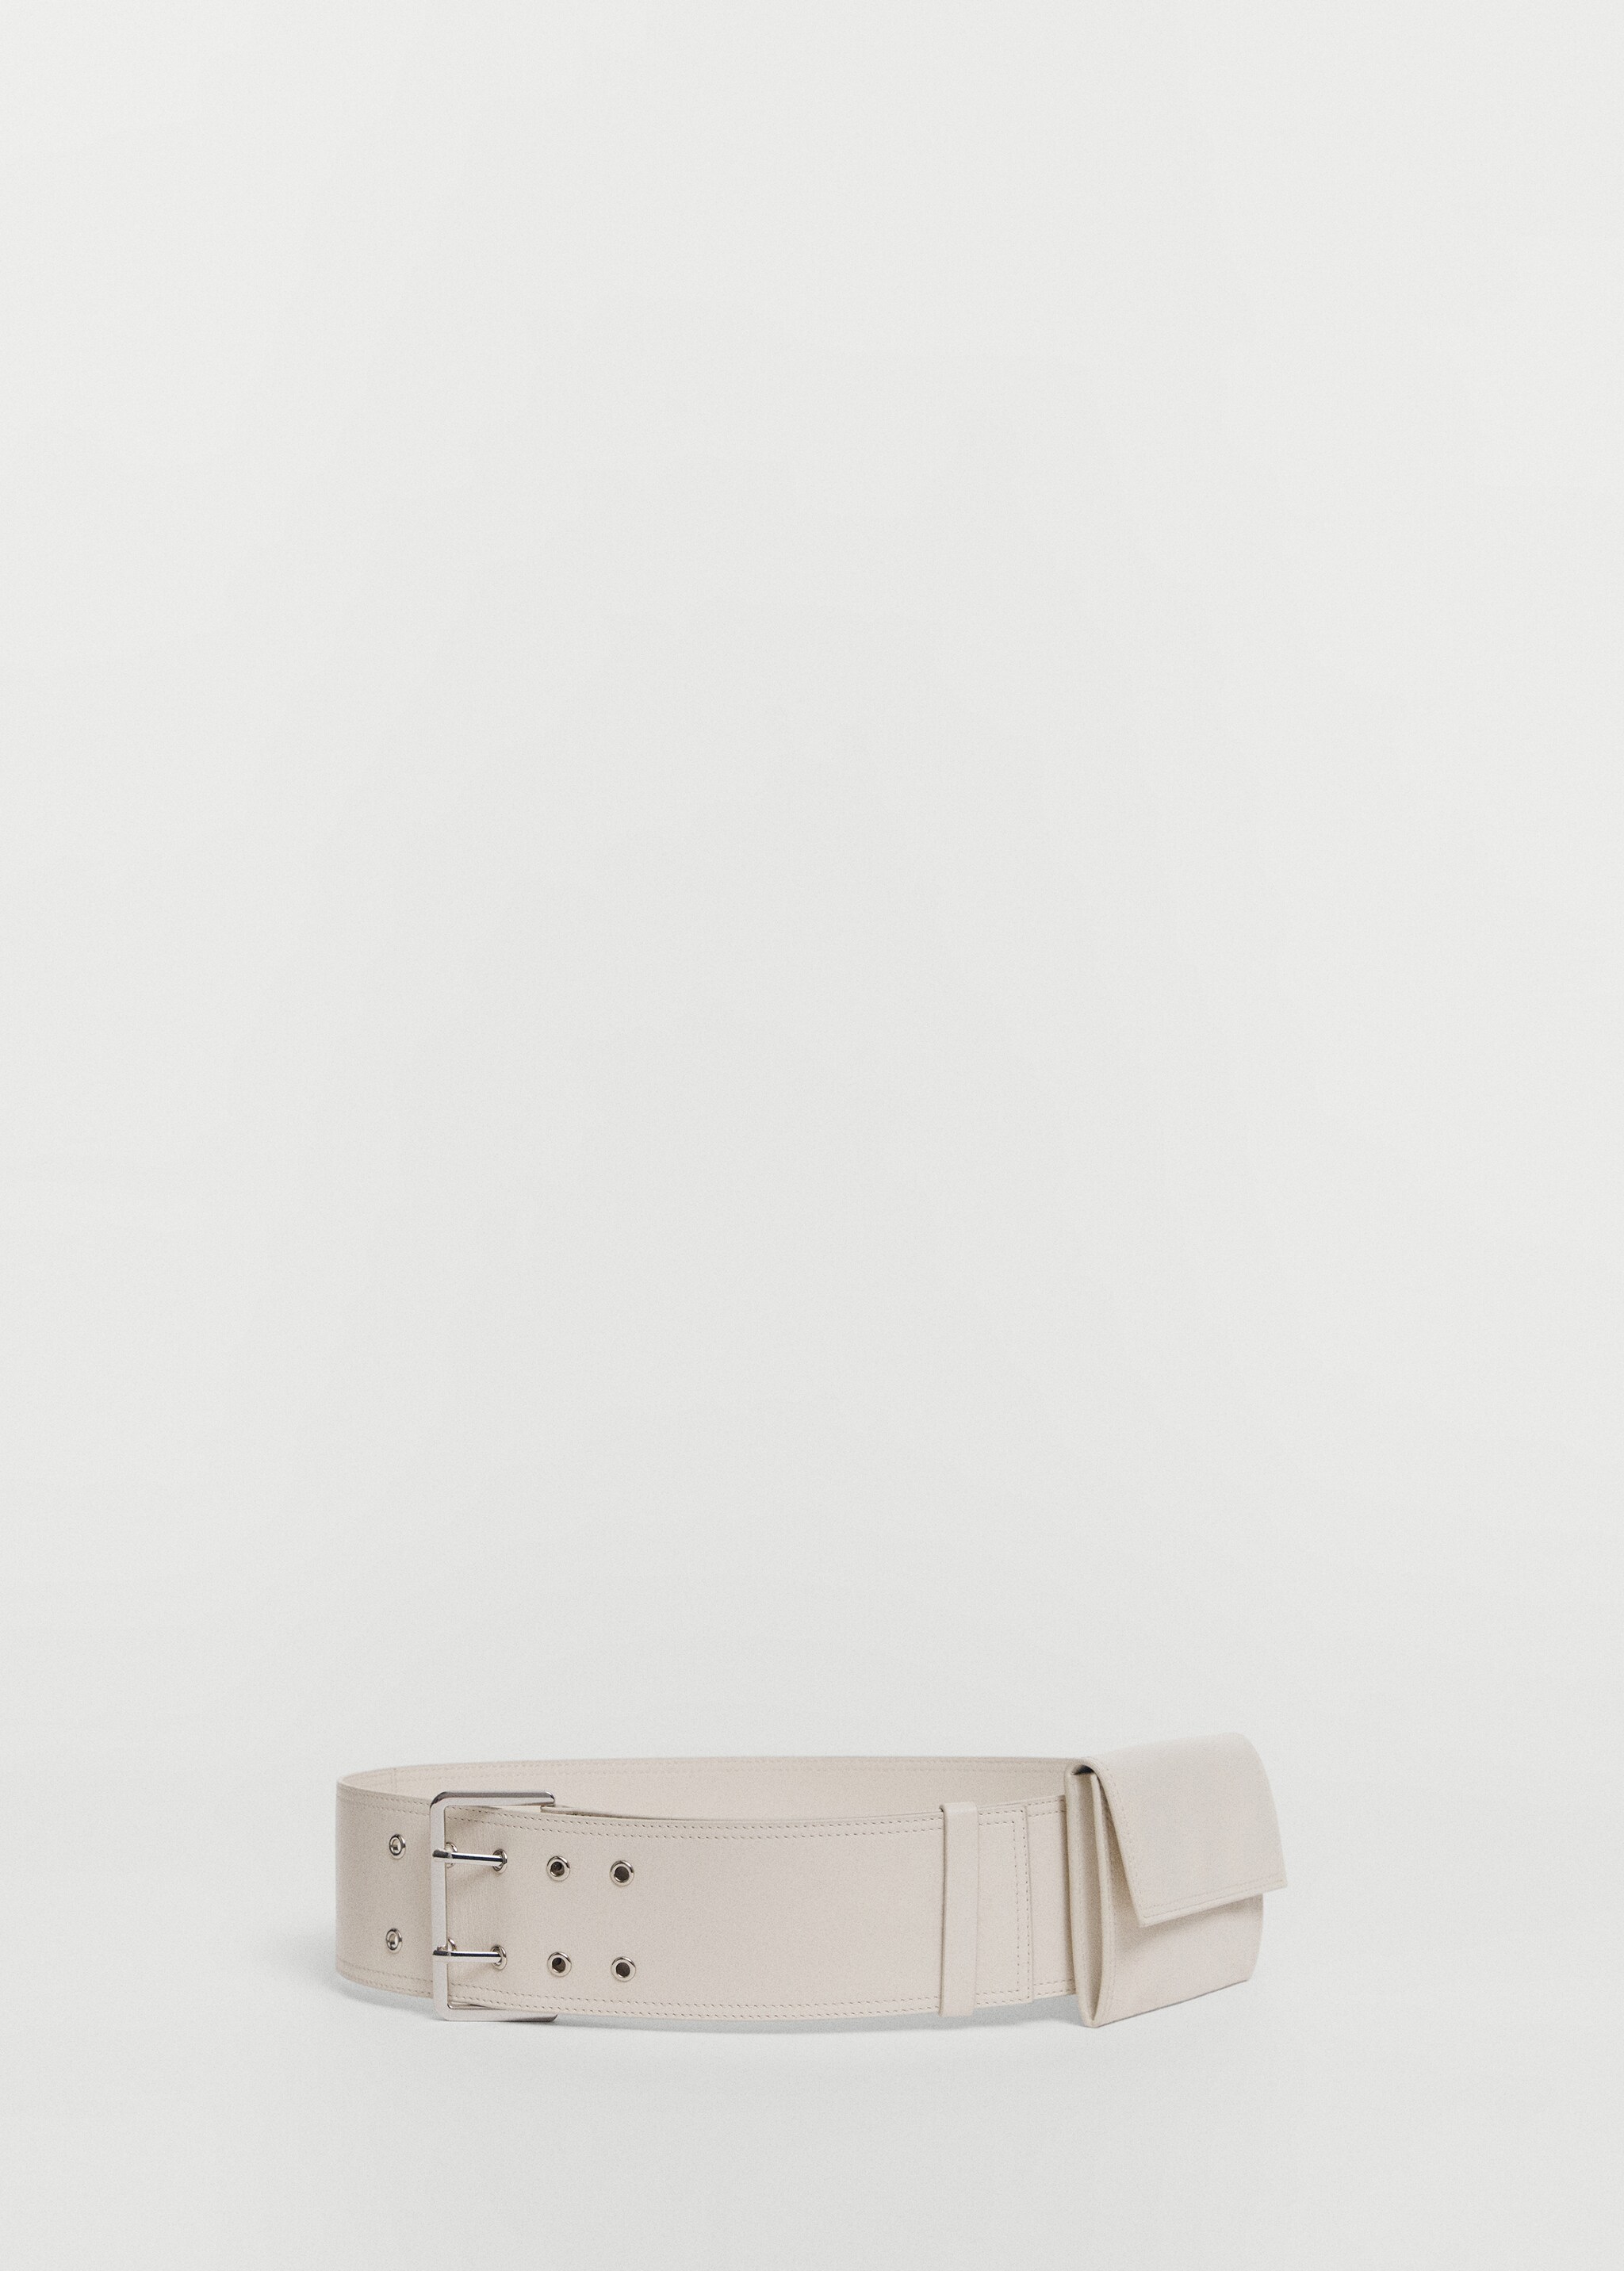 Belted leather money belt - Article without model